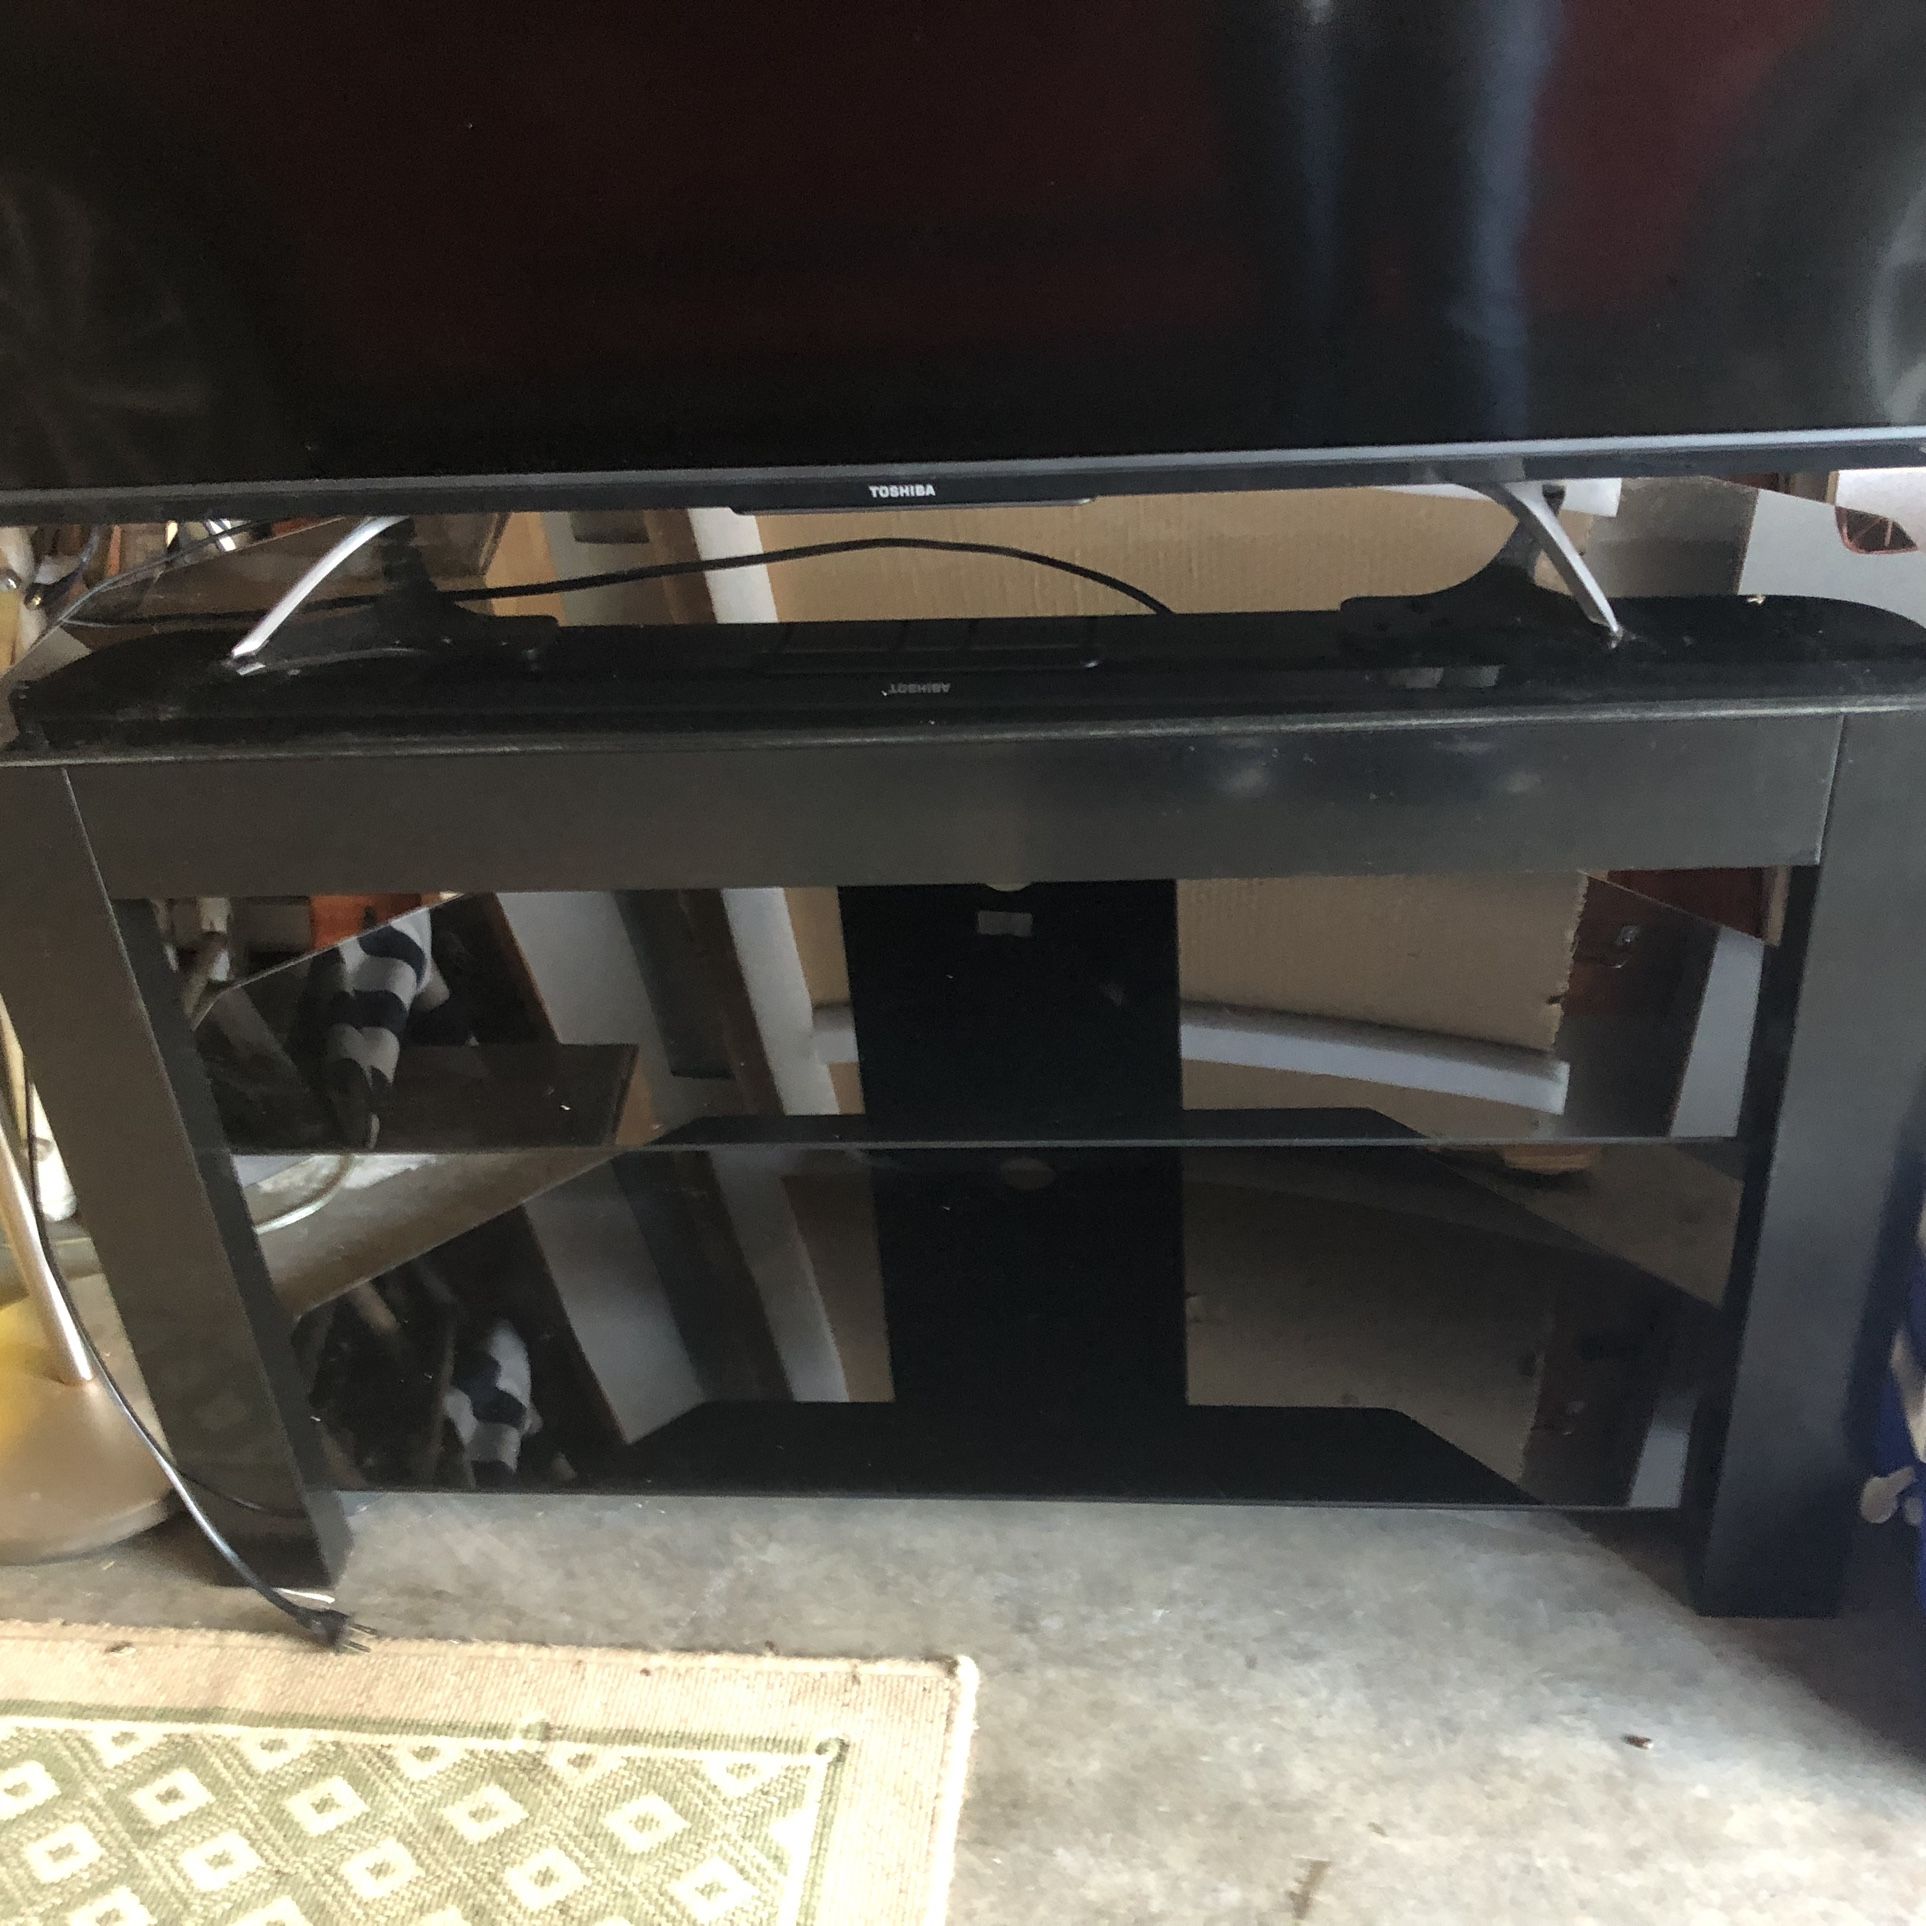 Tv Stand Fits 48” Tv